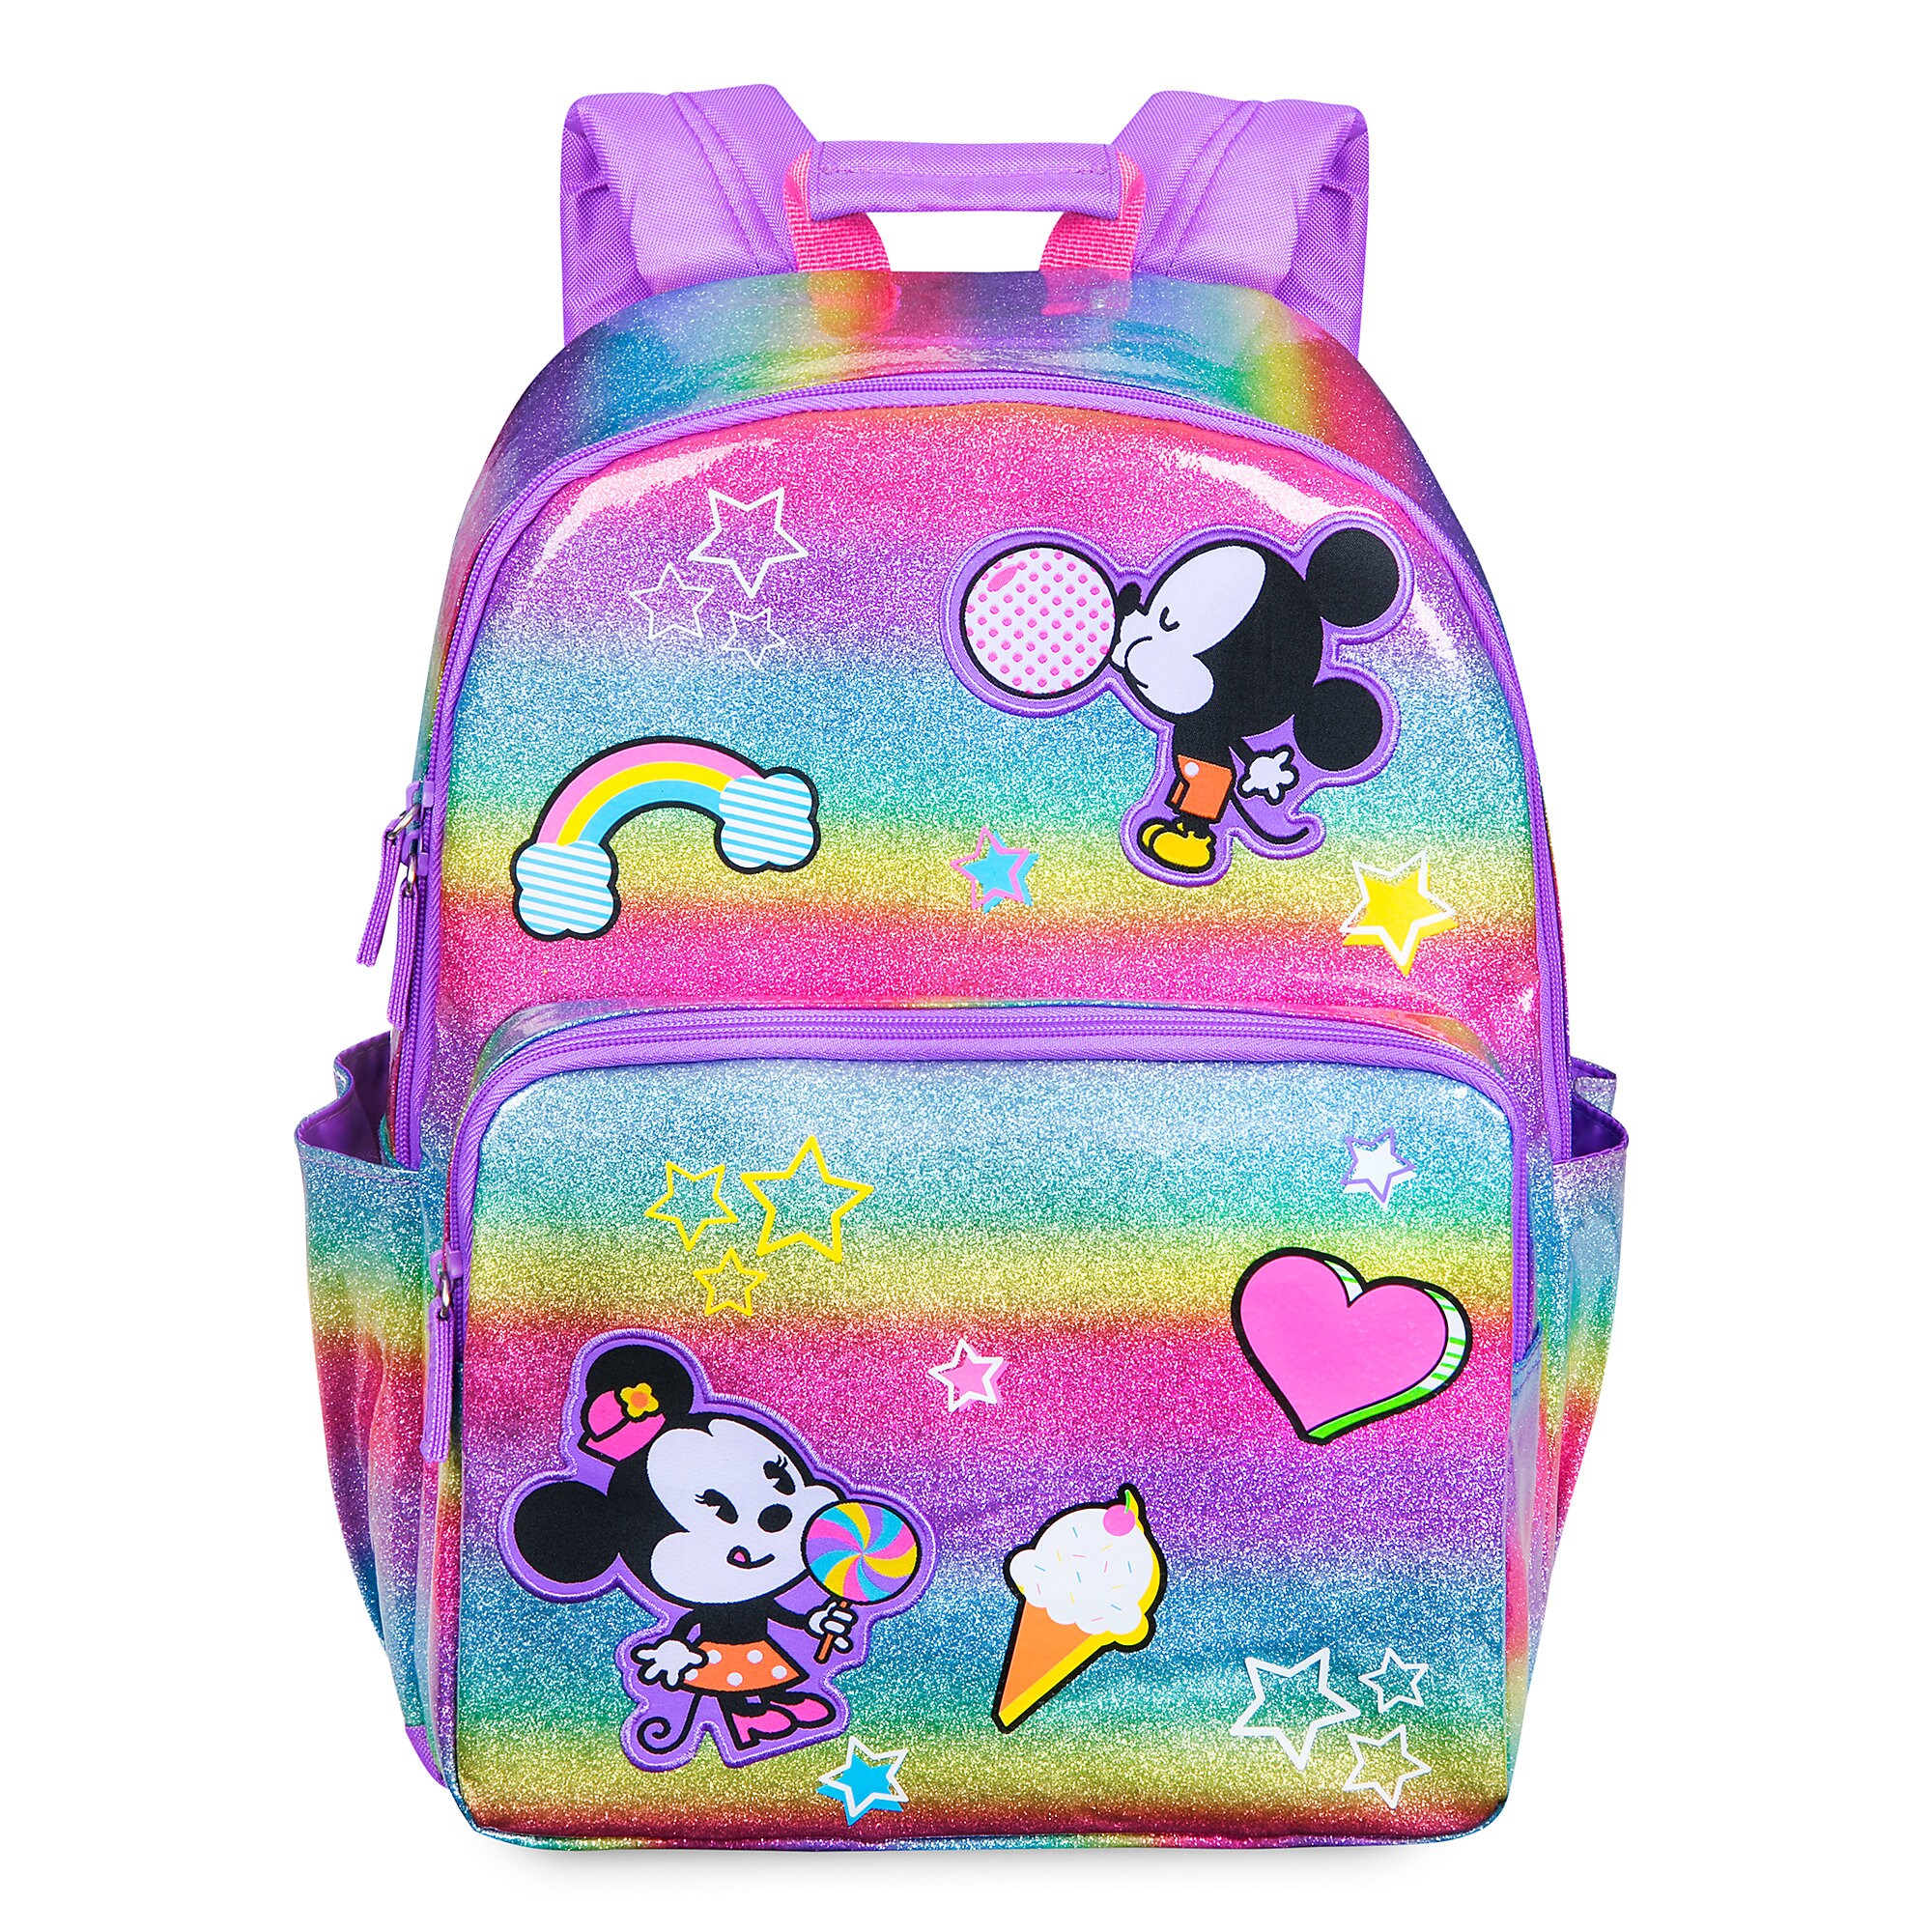 Mickey and Minnie Mouse Backpack - Personalized